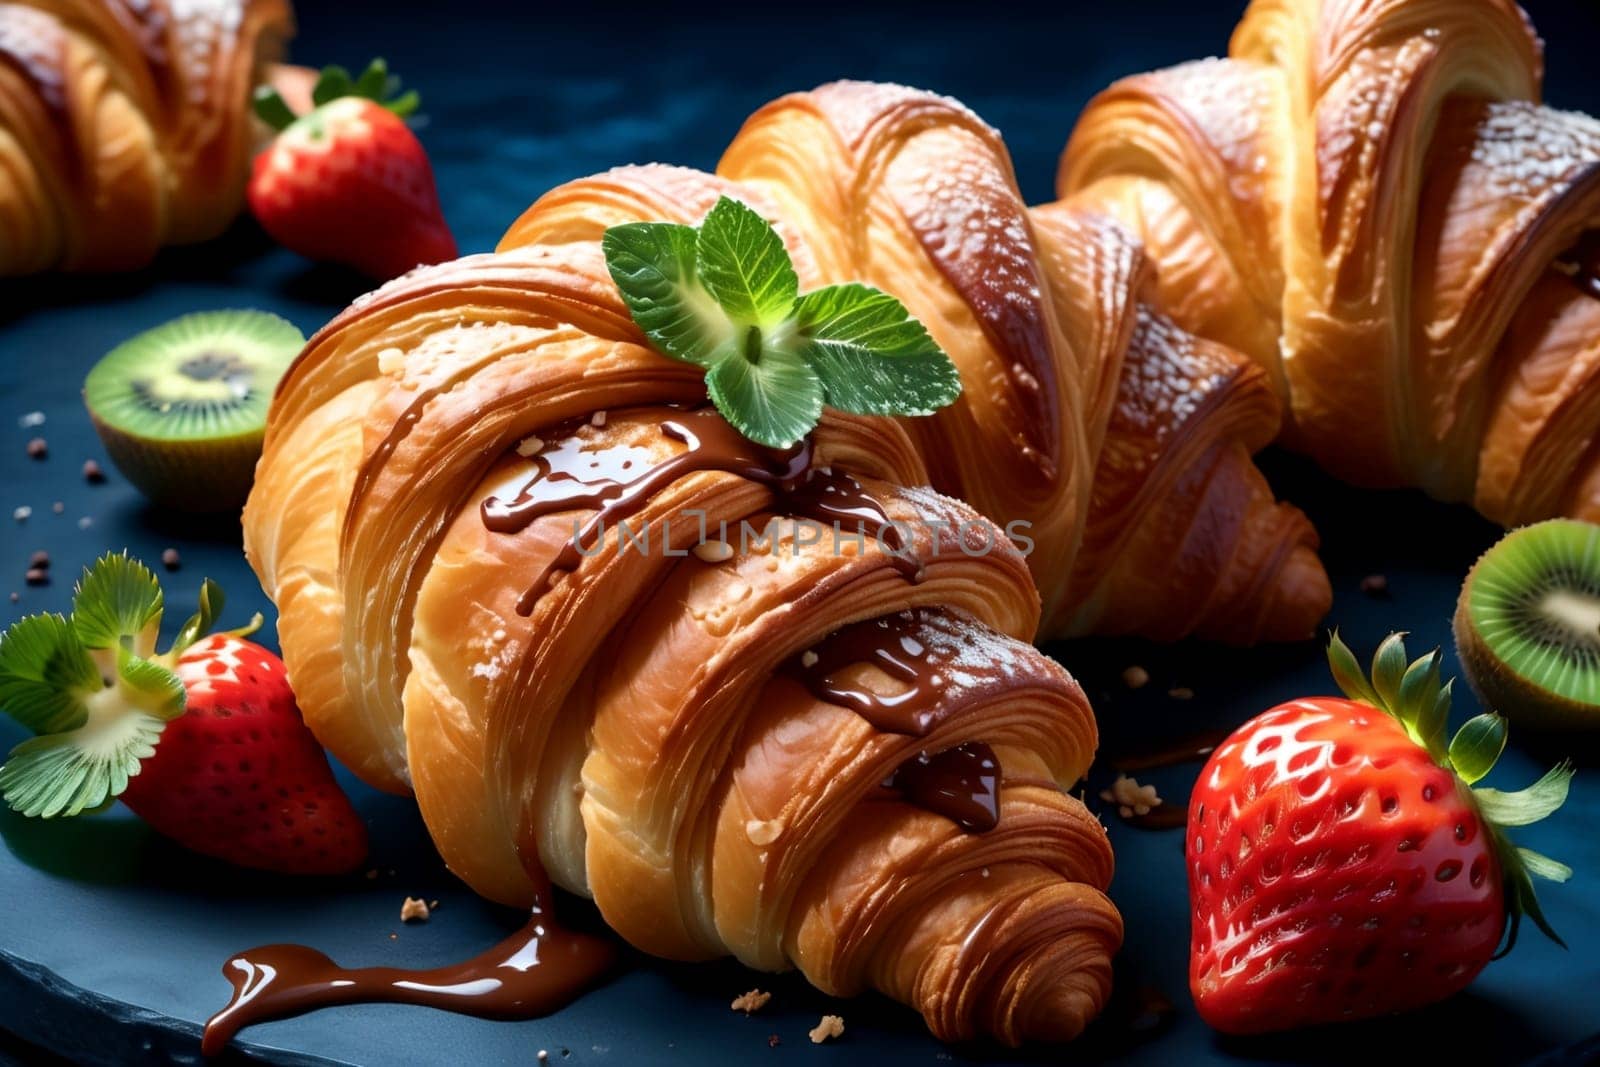 sweet pastries, croissants with strawberries and other fruits by Rawlik